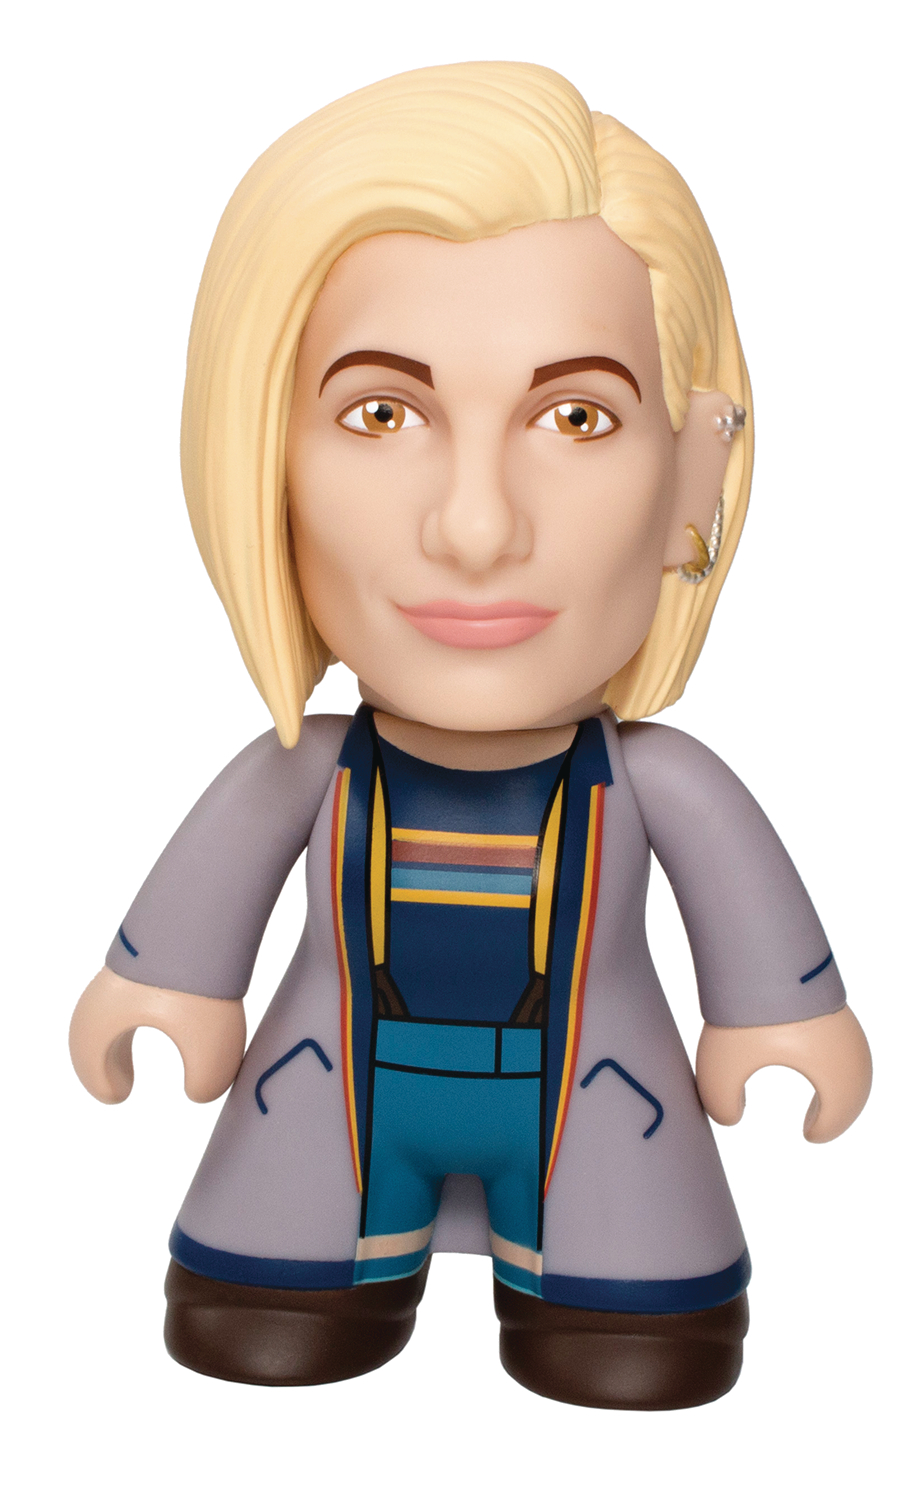 13th doctor toys